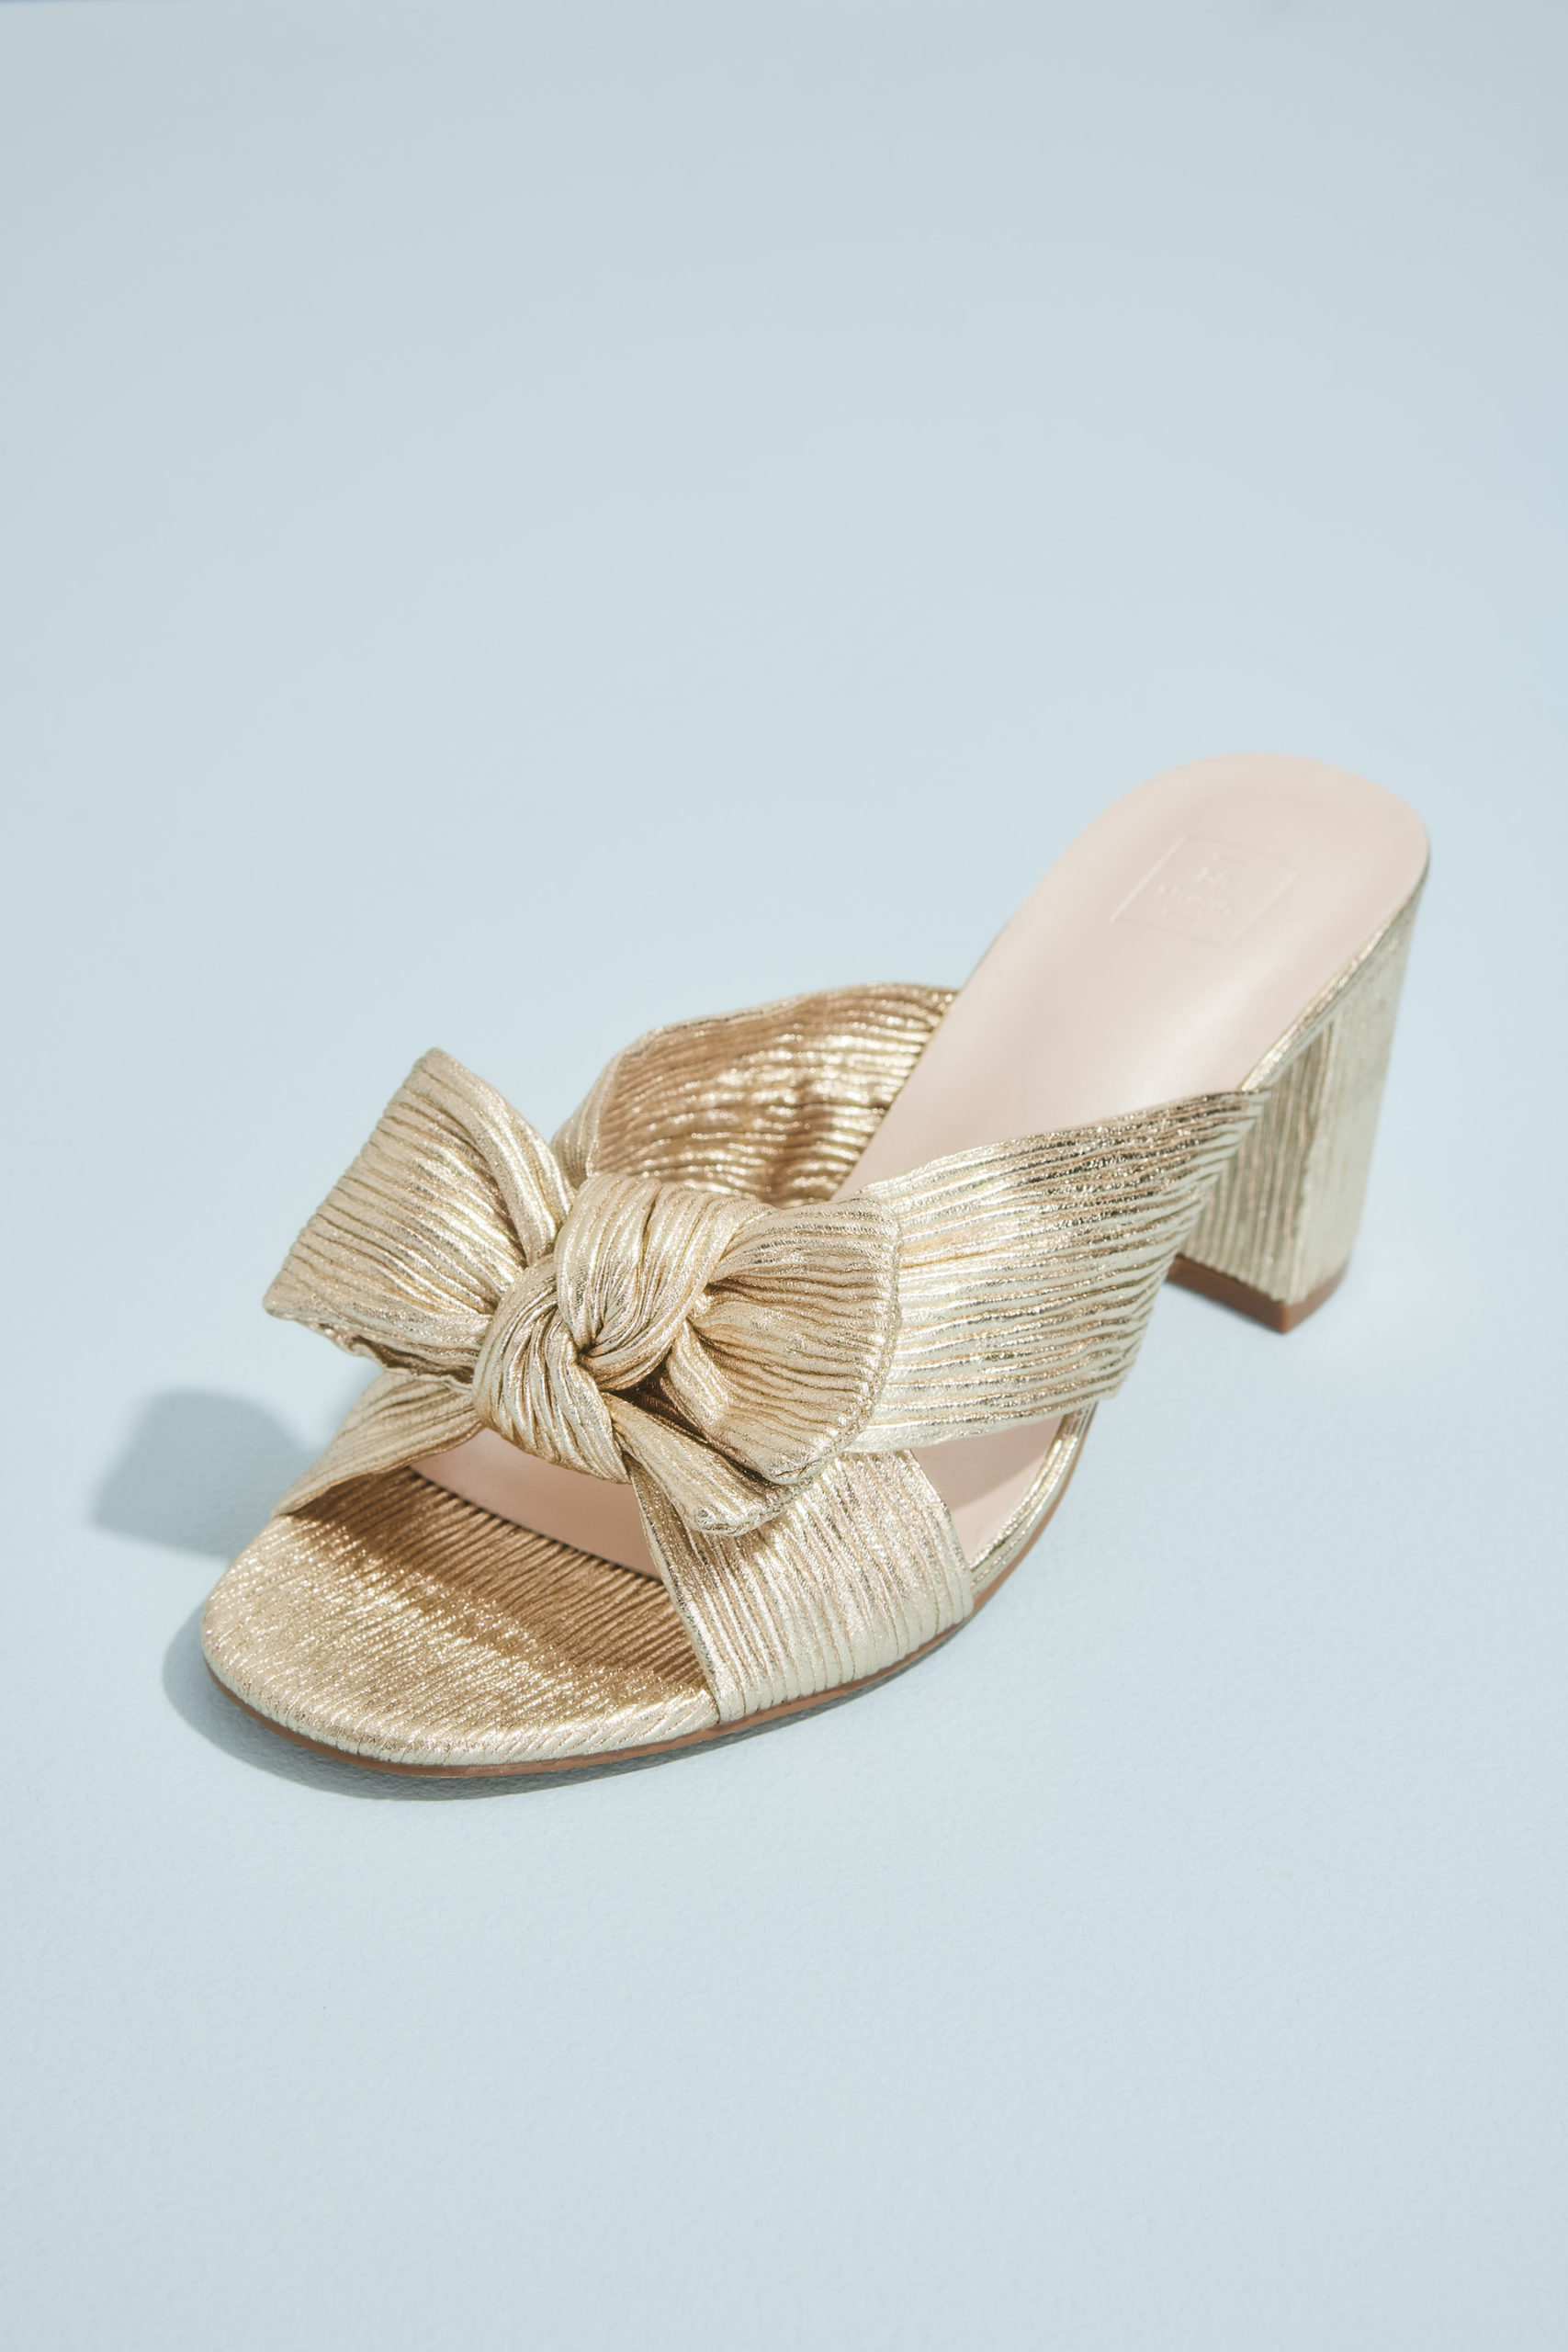 wedding shoe mule with bow for the bride